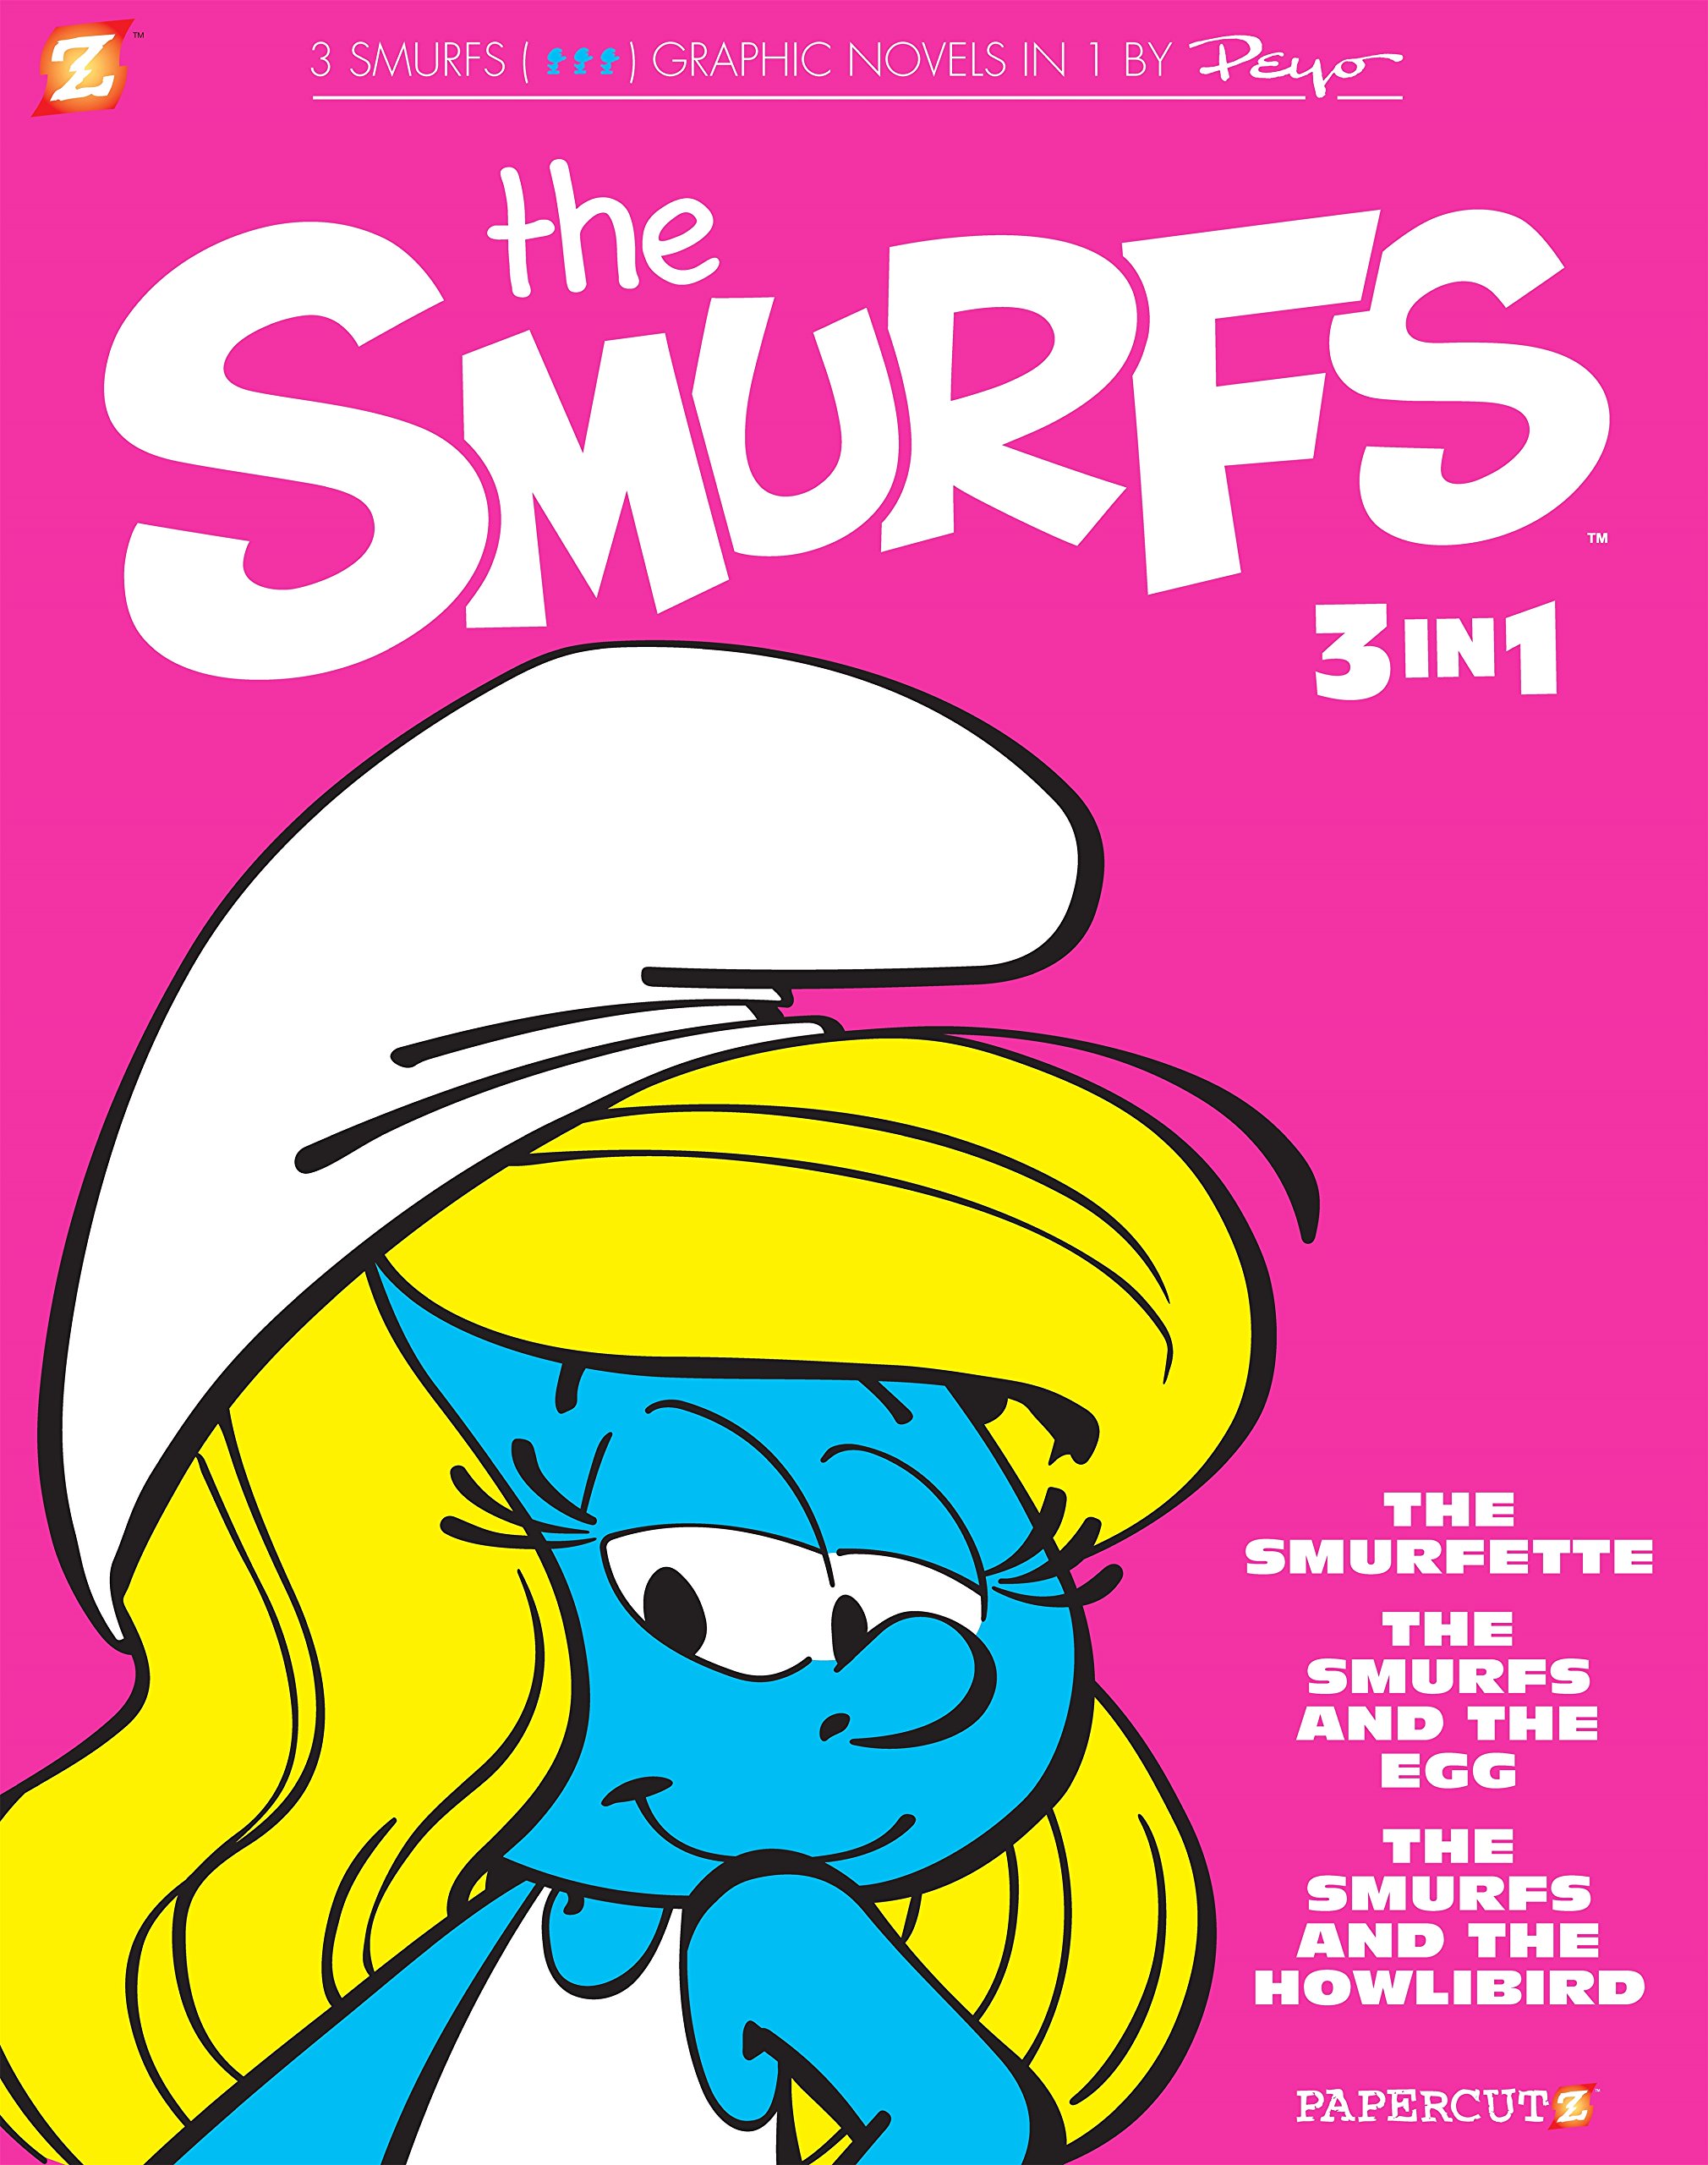 The Smurfs 3-in-1 #2: The Smurfette, The Smurfs and the Egg, and The Smurfs and the Howlibird (The Smurfs Graphic Novels, 2)